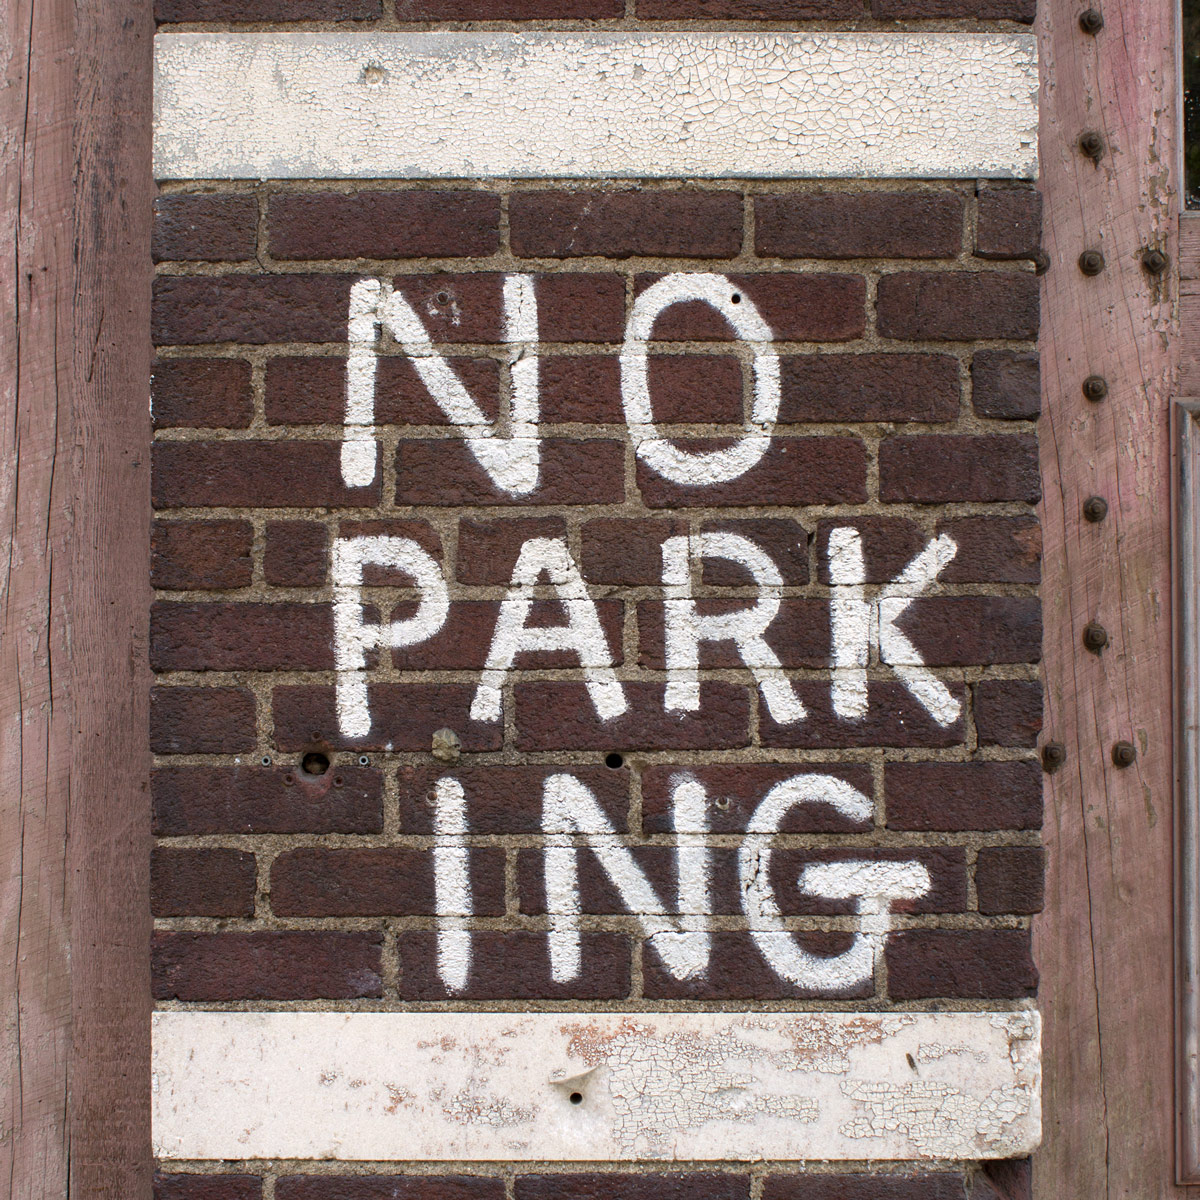 No parking sign where ‘park’ and ‘ing’ have been split up into two words and placed on separate lines so that they could be rendered larger to take advantage of the vertically-narrow space